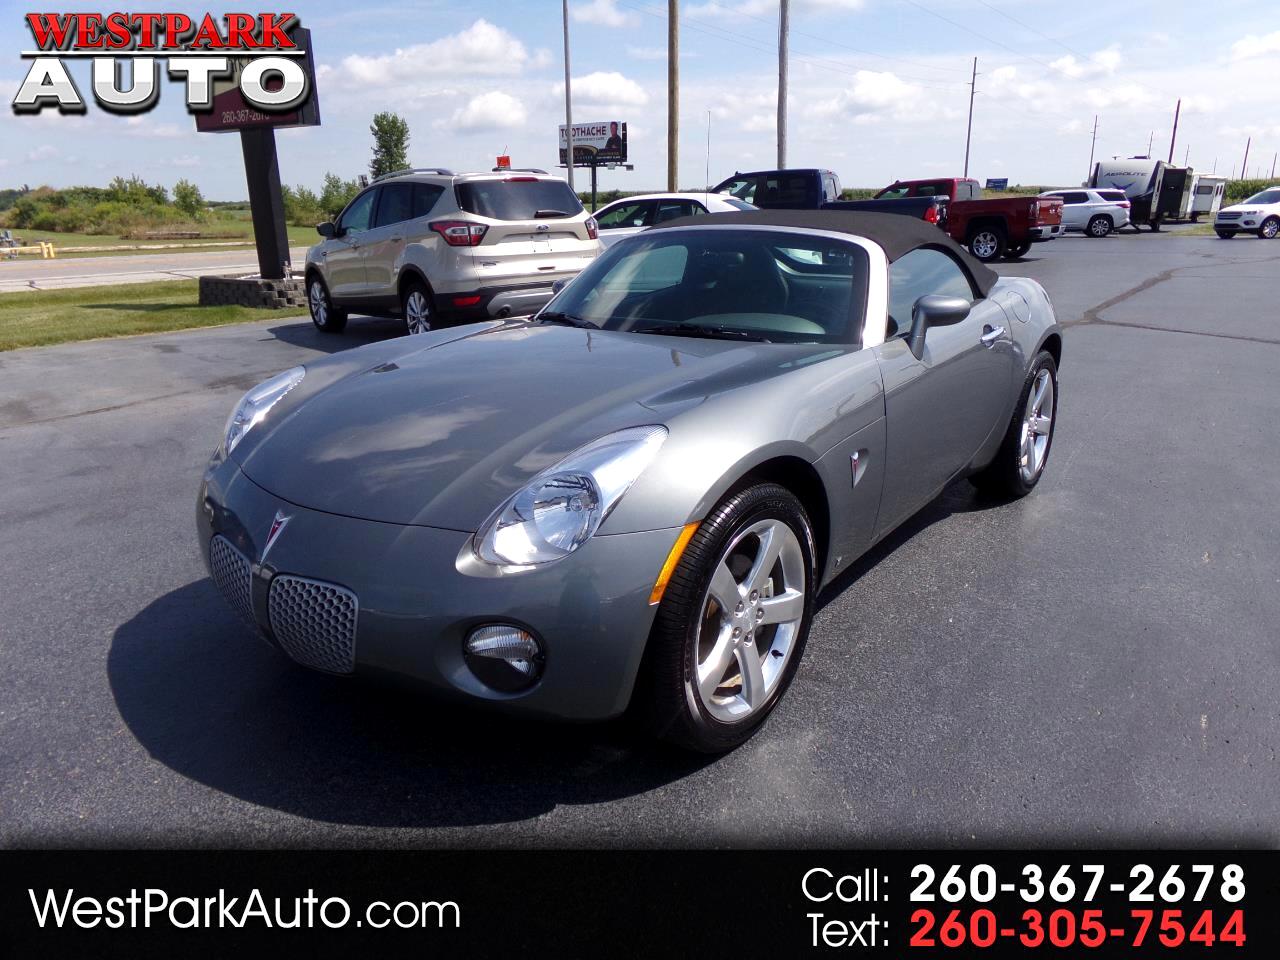 Used 2007 Pontiac Solstice 2dr Convertible For Sale In